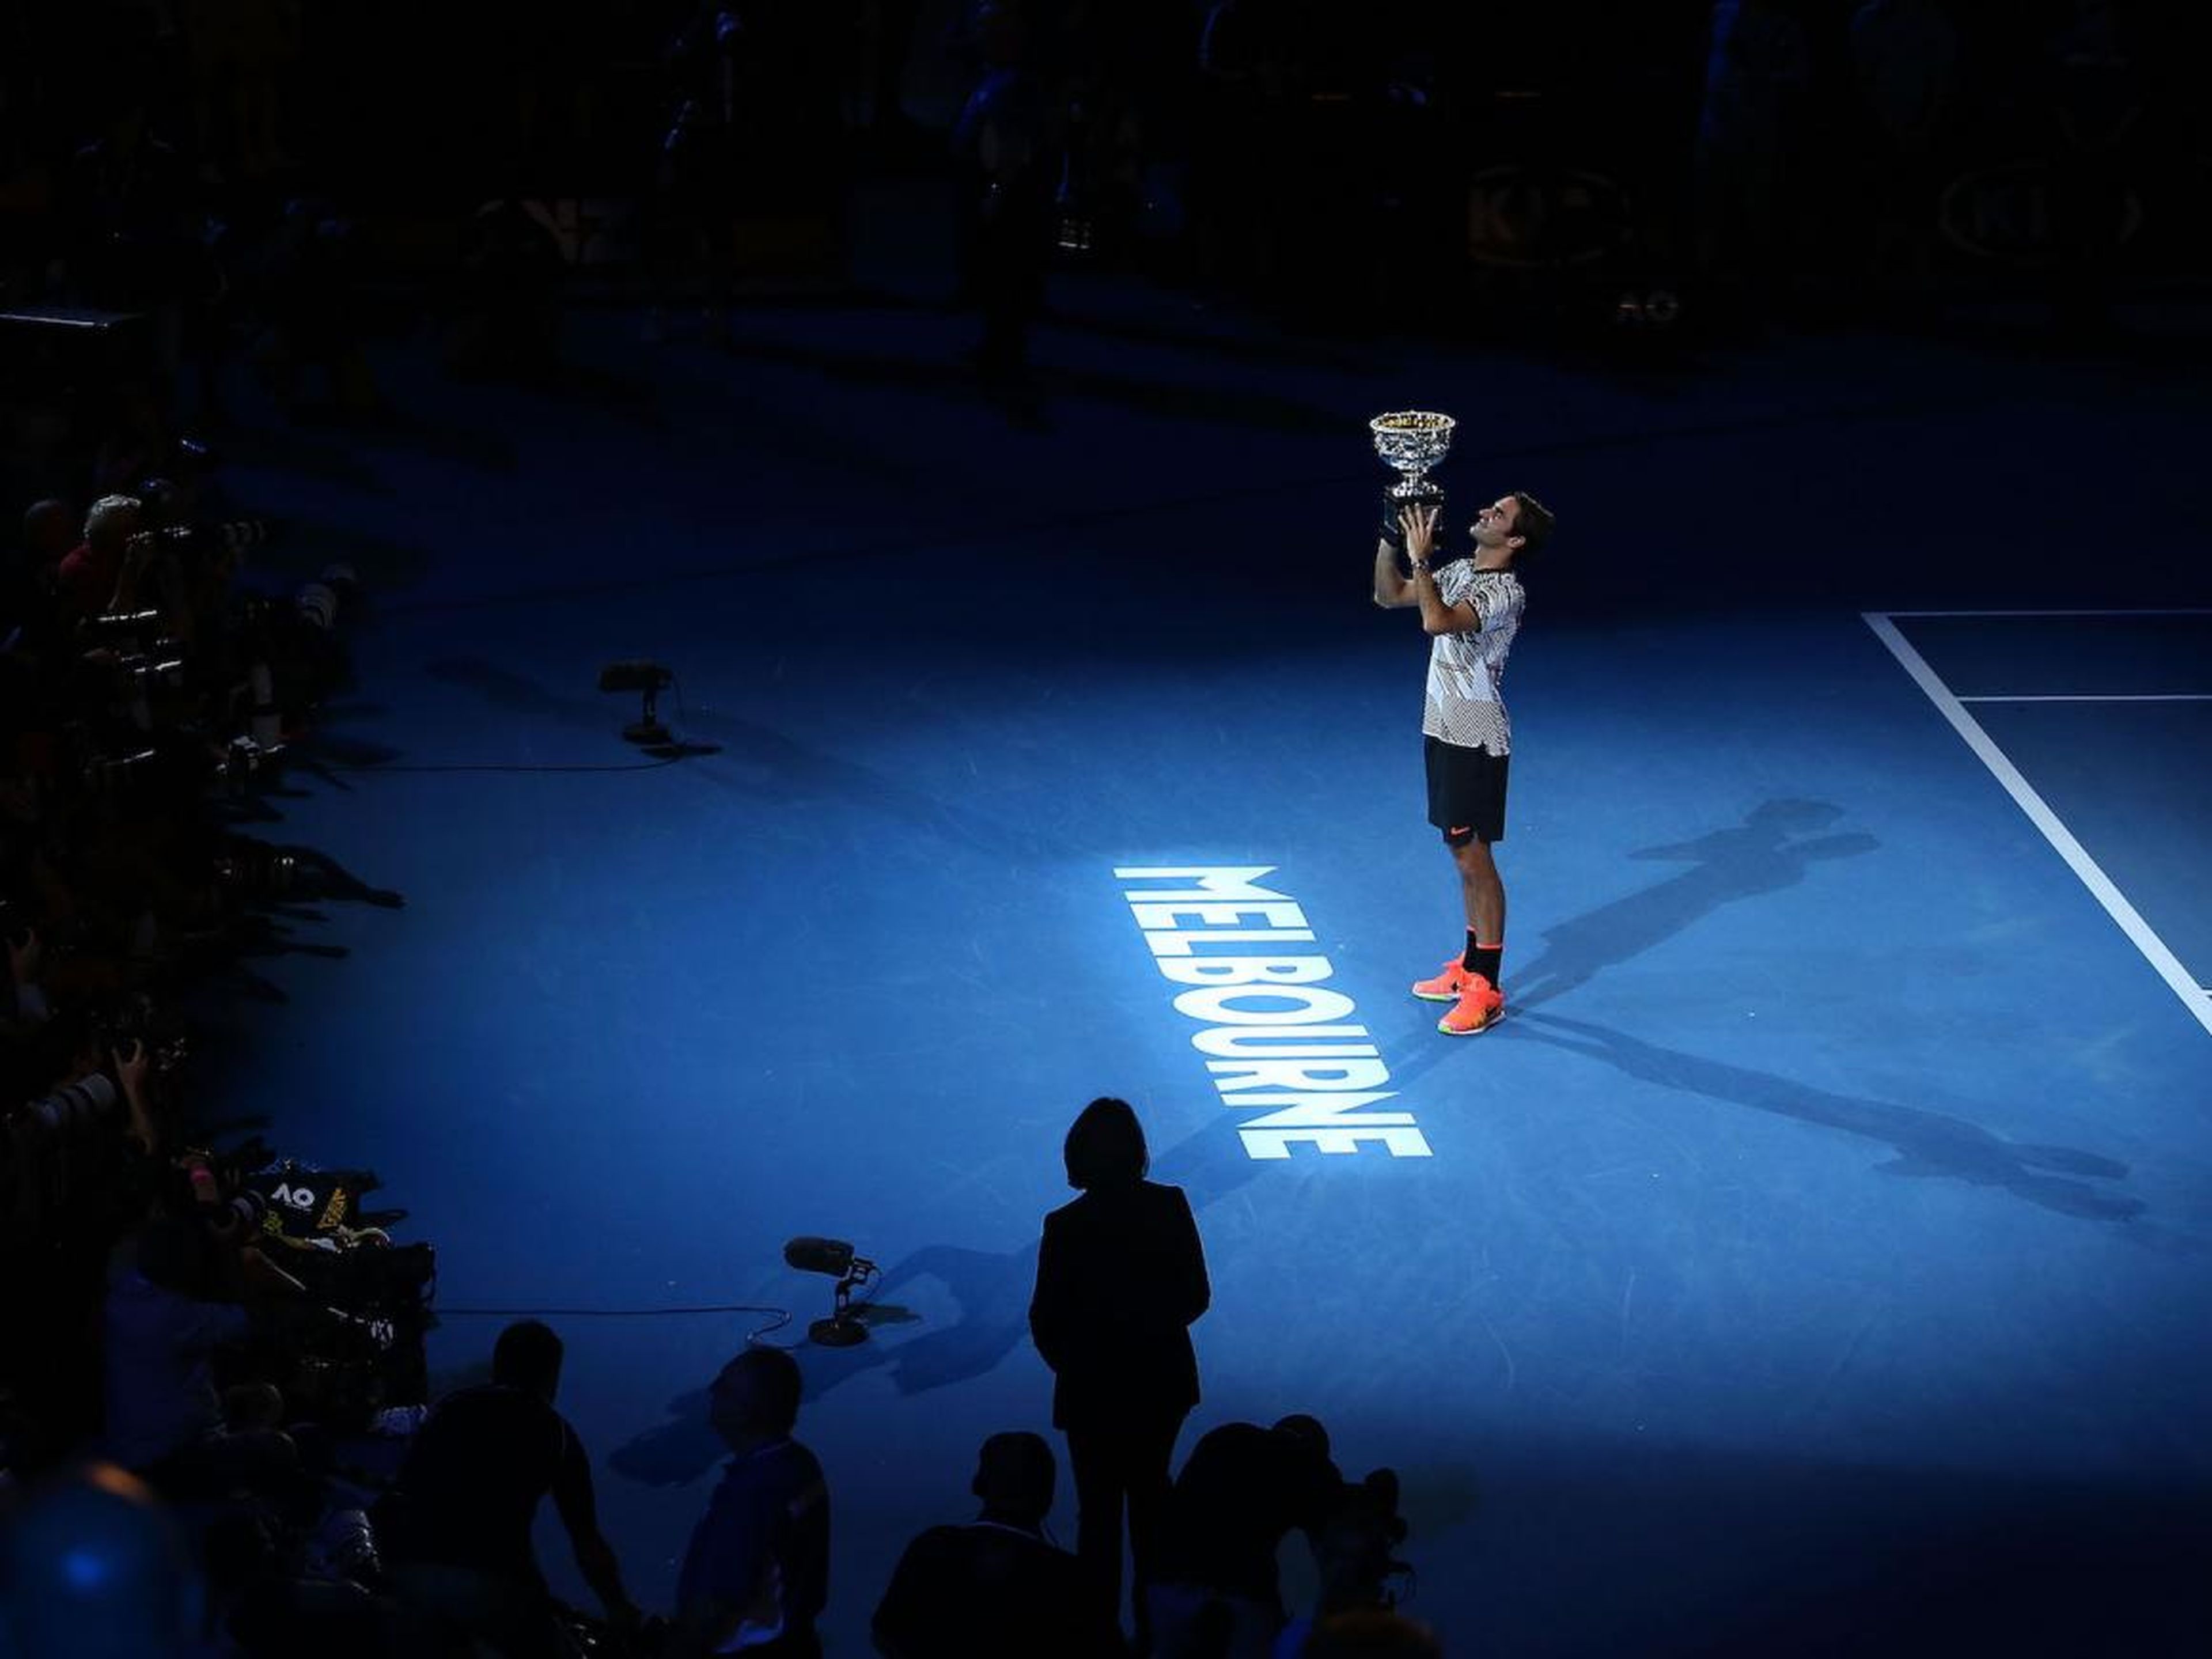 One of Federer's many trophy ceremonies.